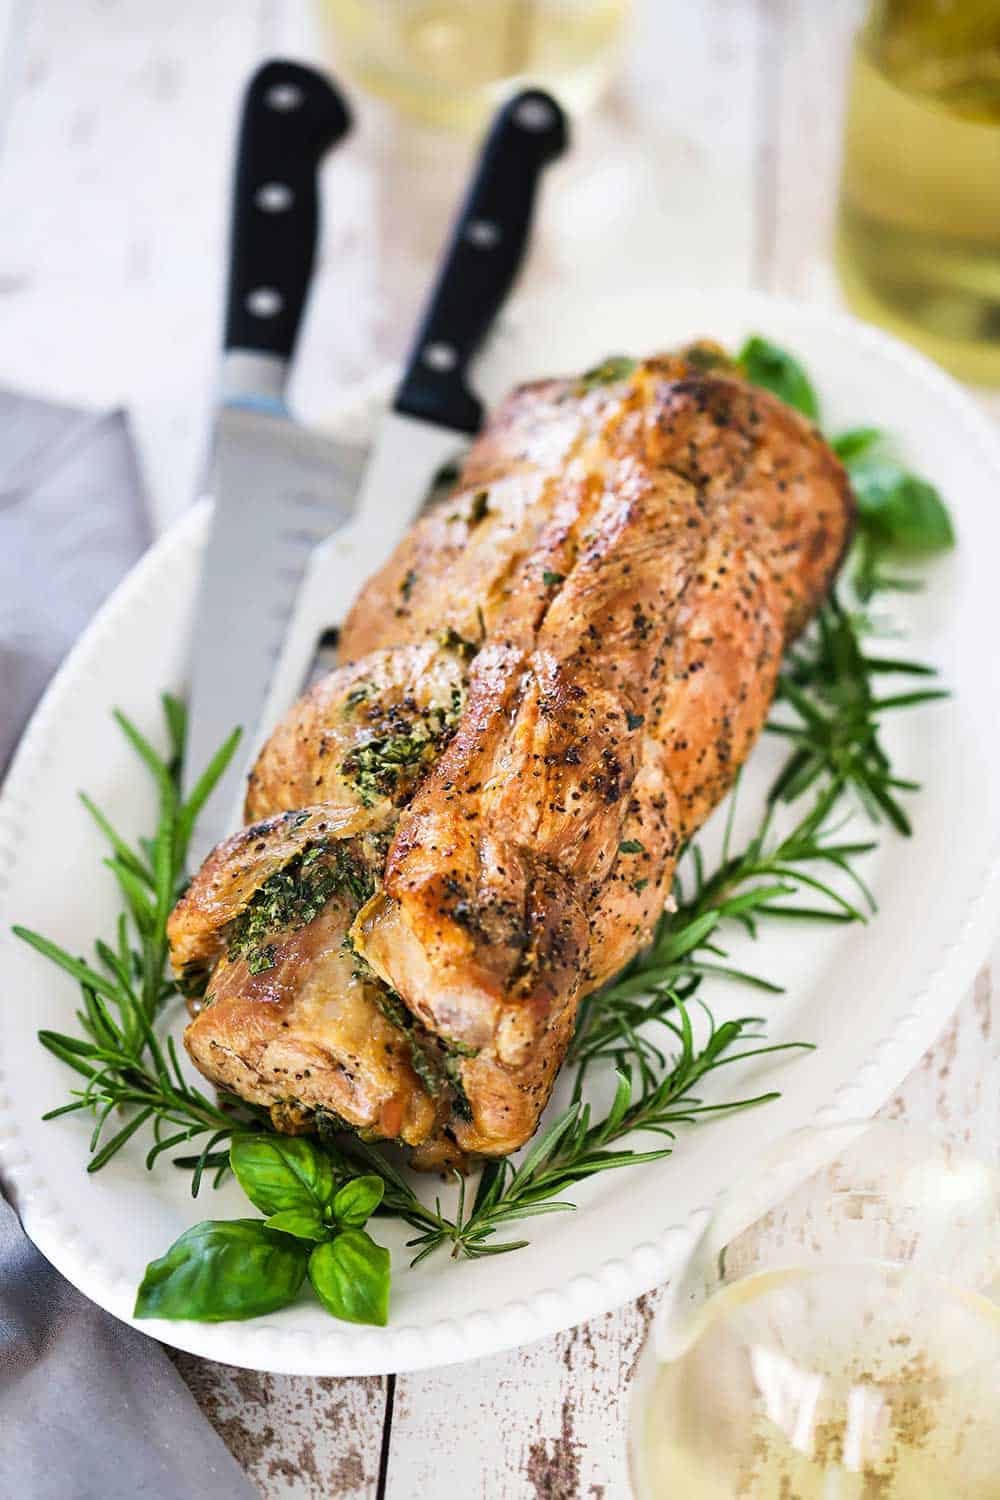 An herb-stuffed pork loin roast sitting on an oval platter with a large knife and fresh herbs nestled around it.